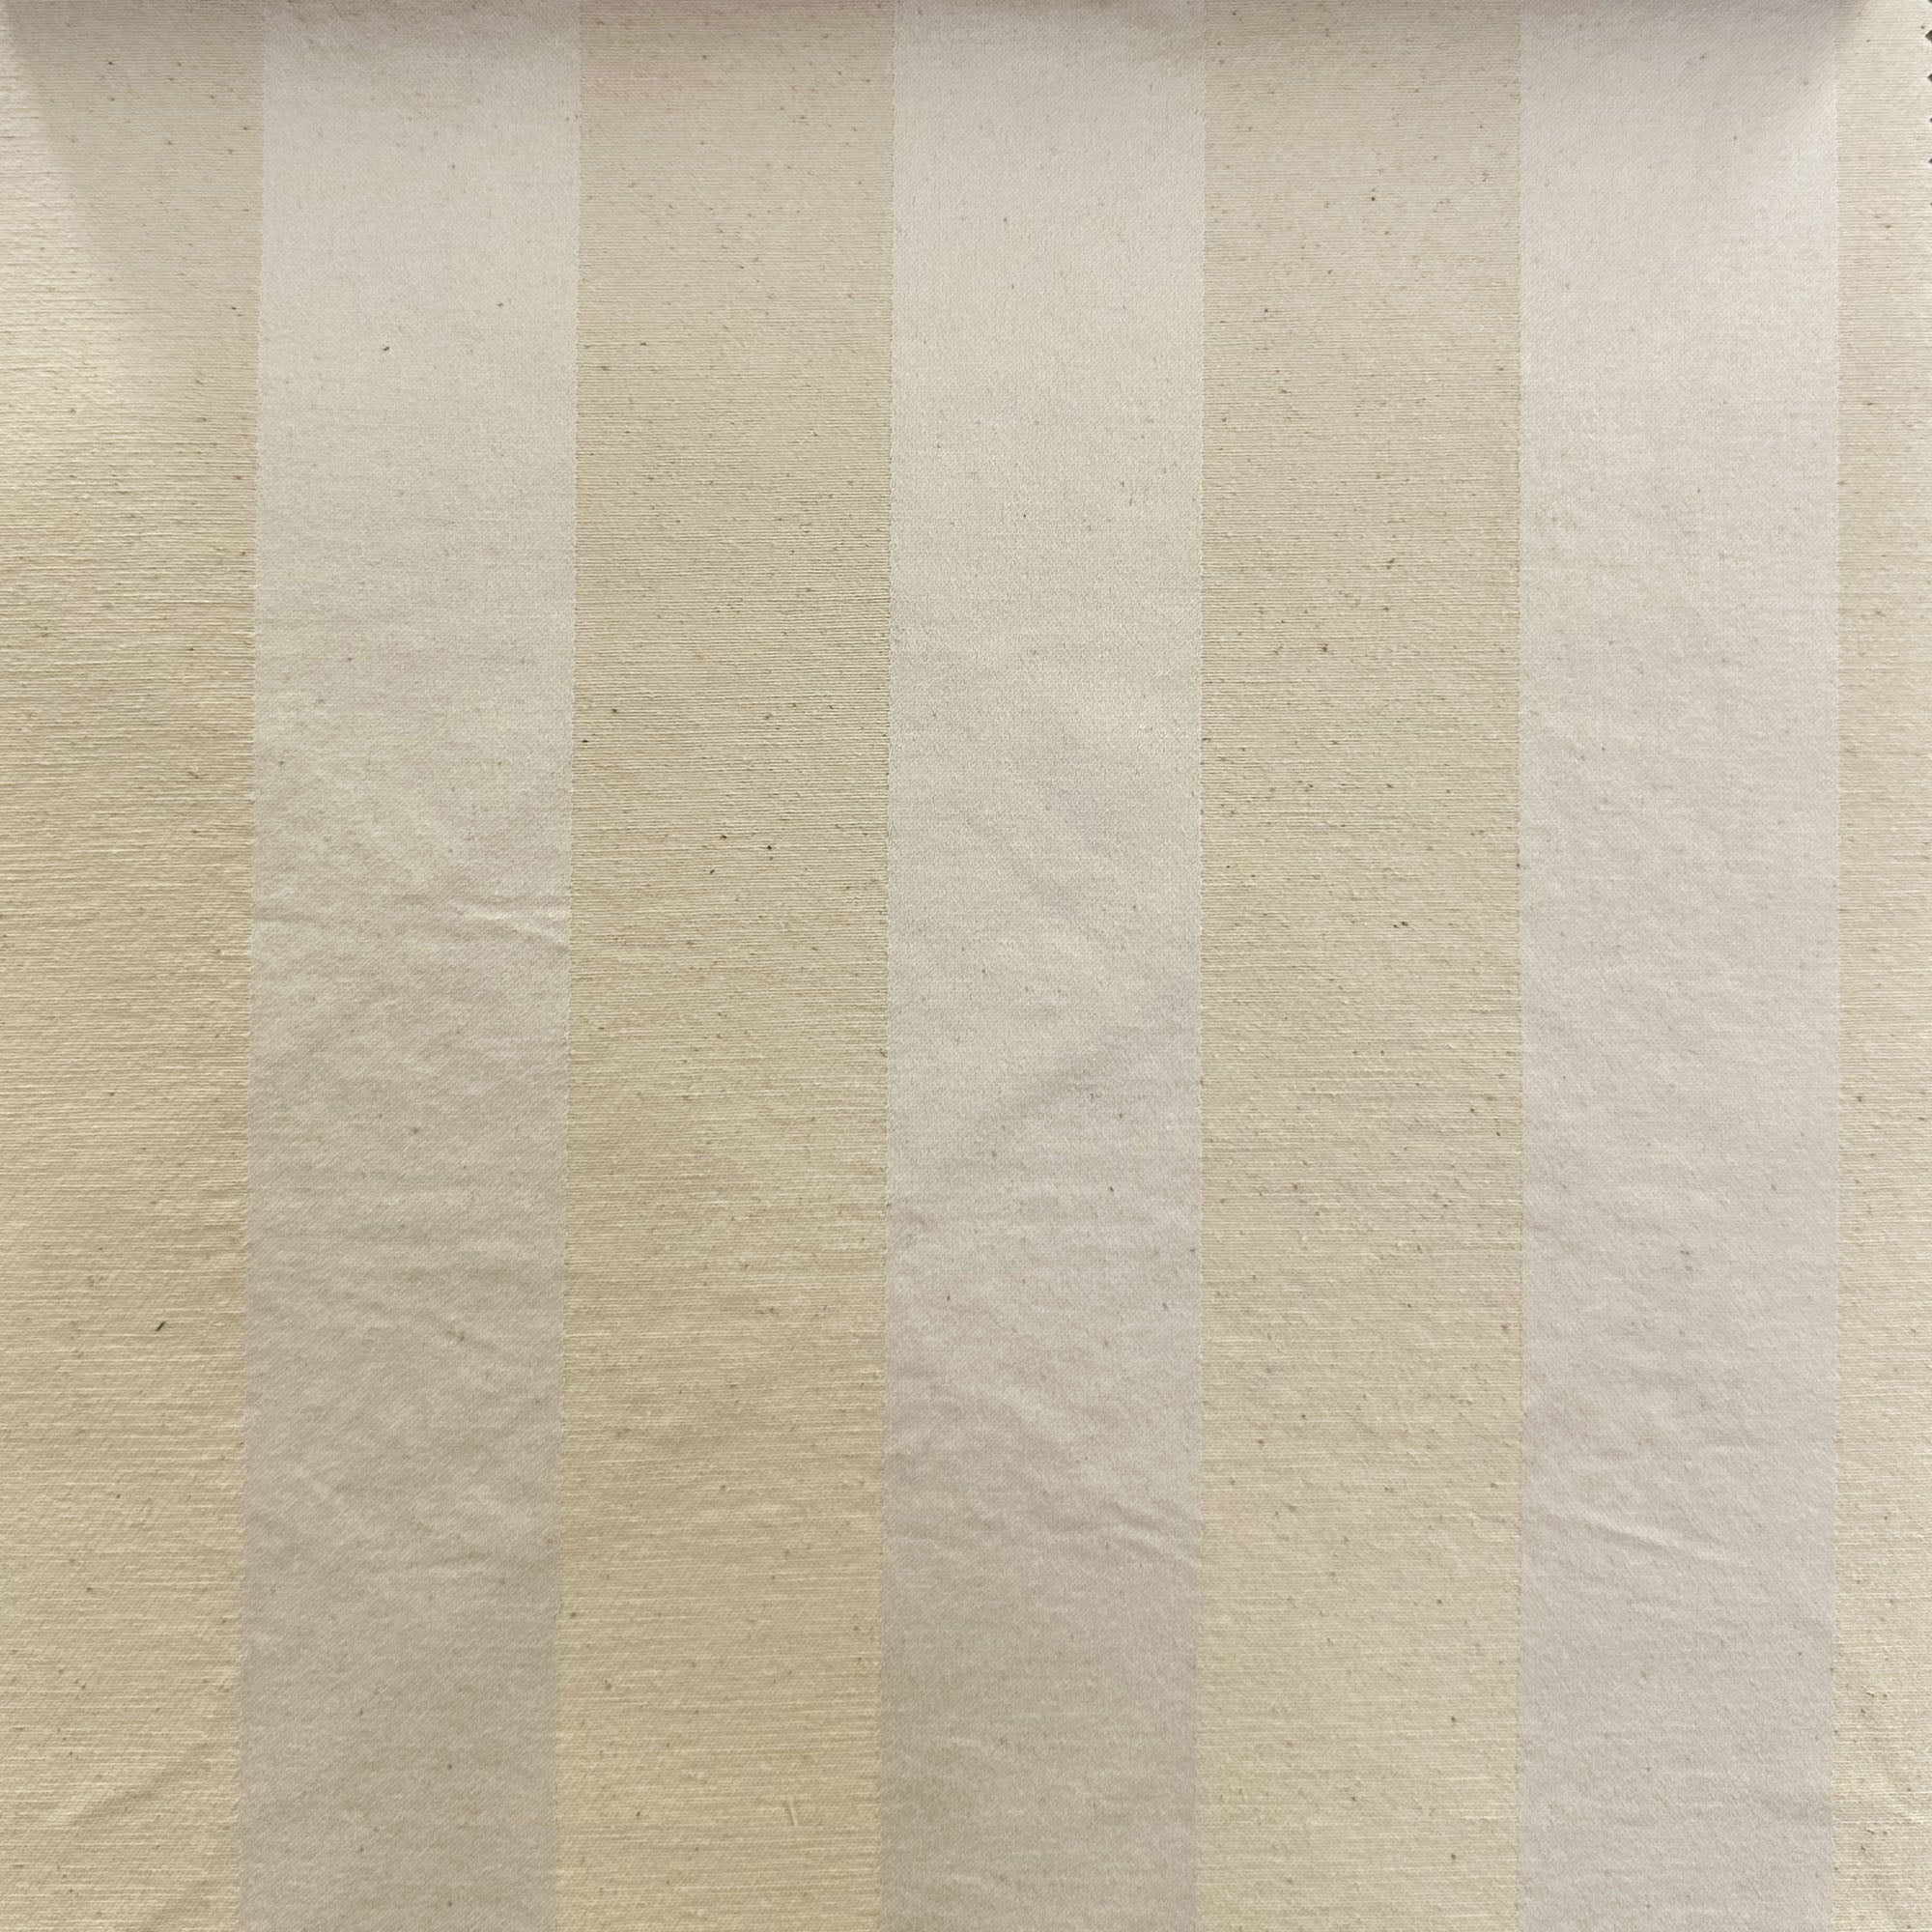 Libby Fabric | Embossed Striped Jacquard